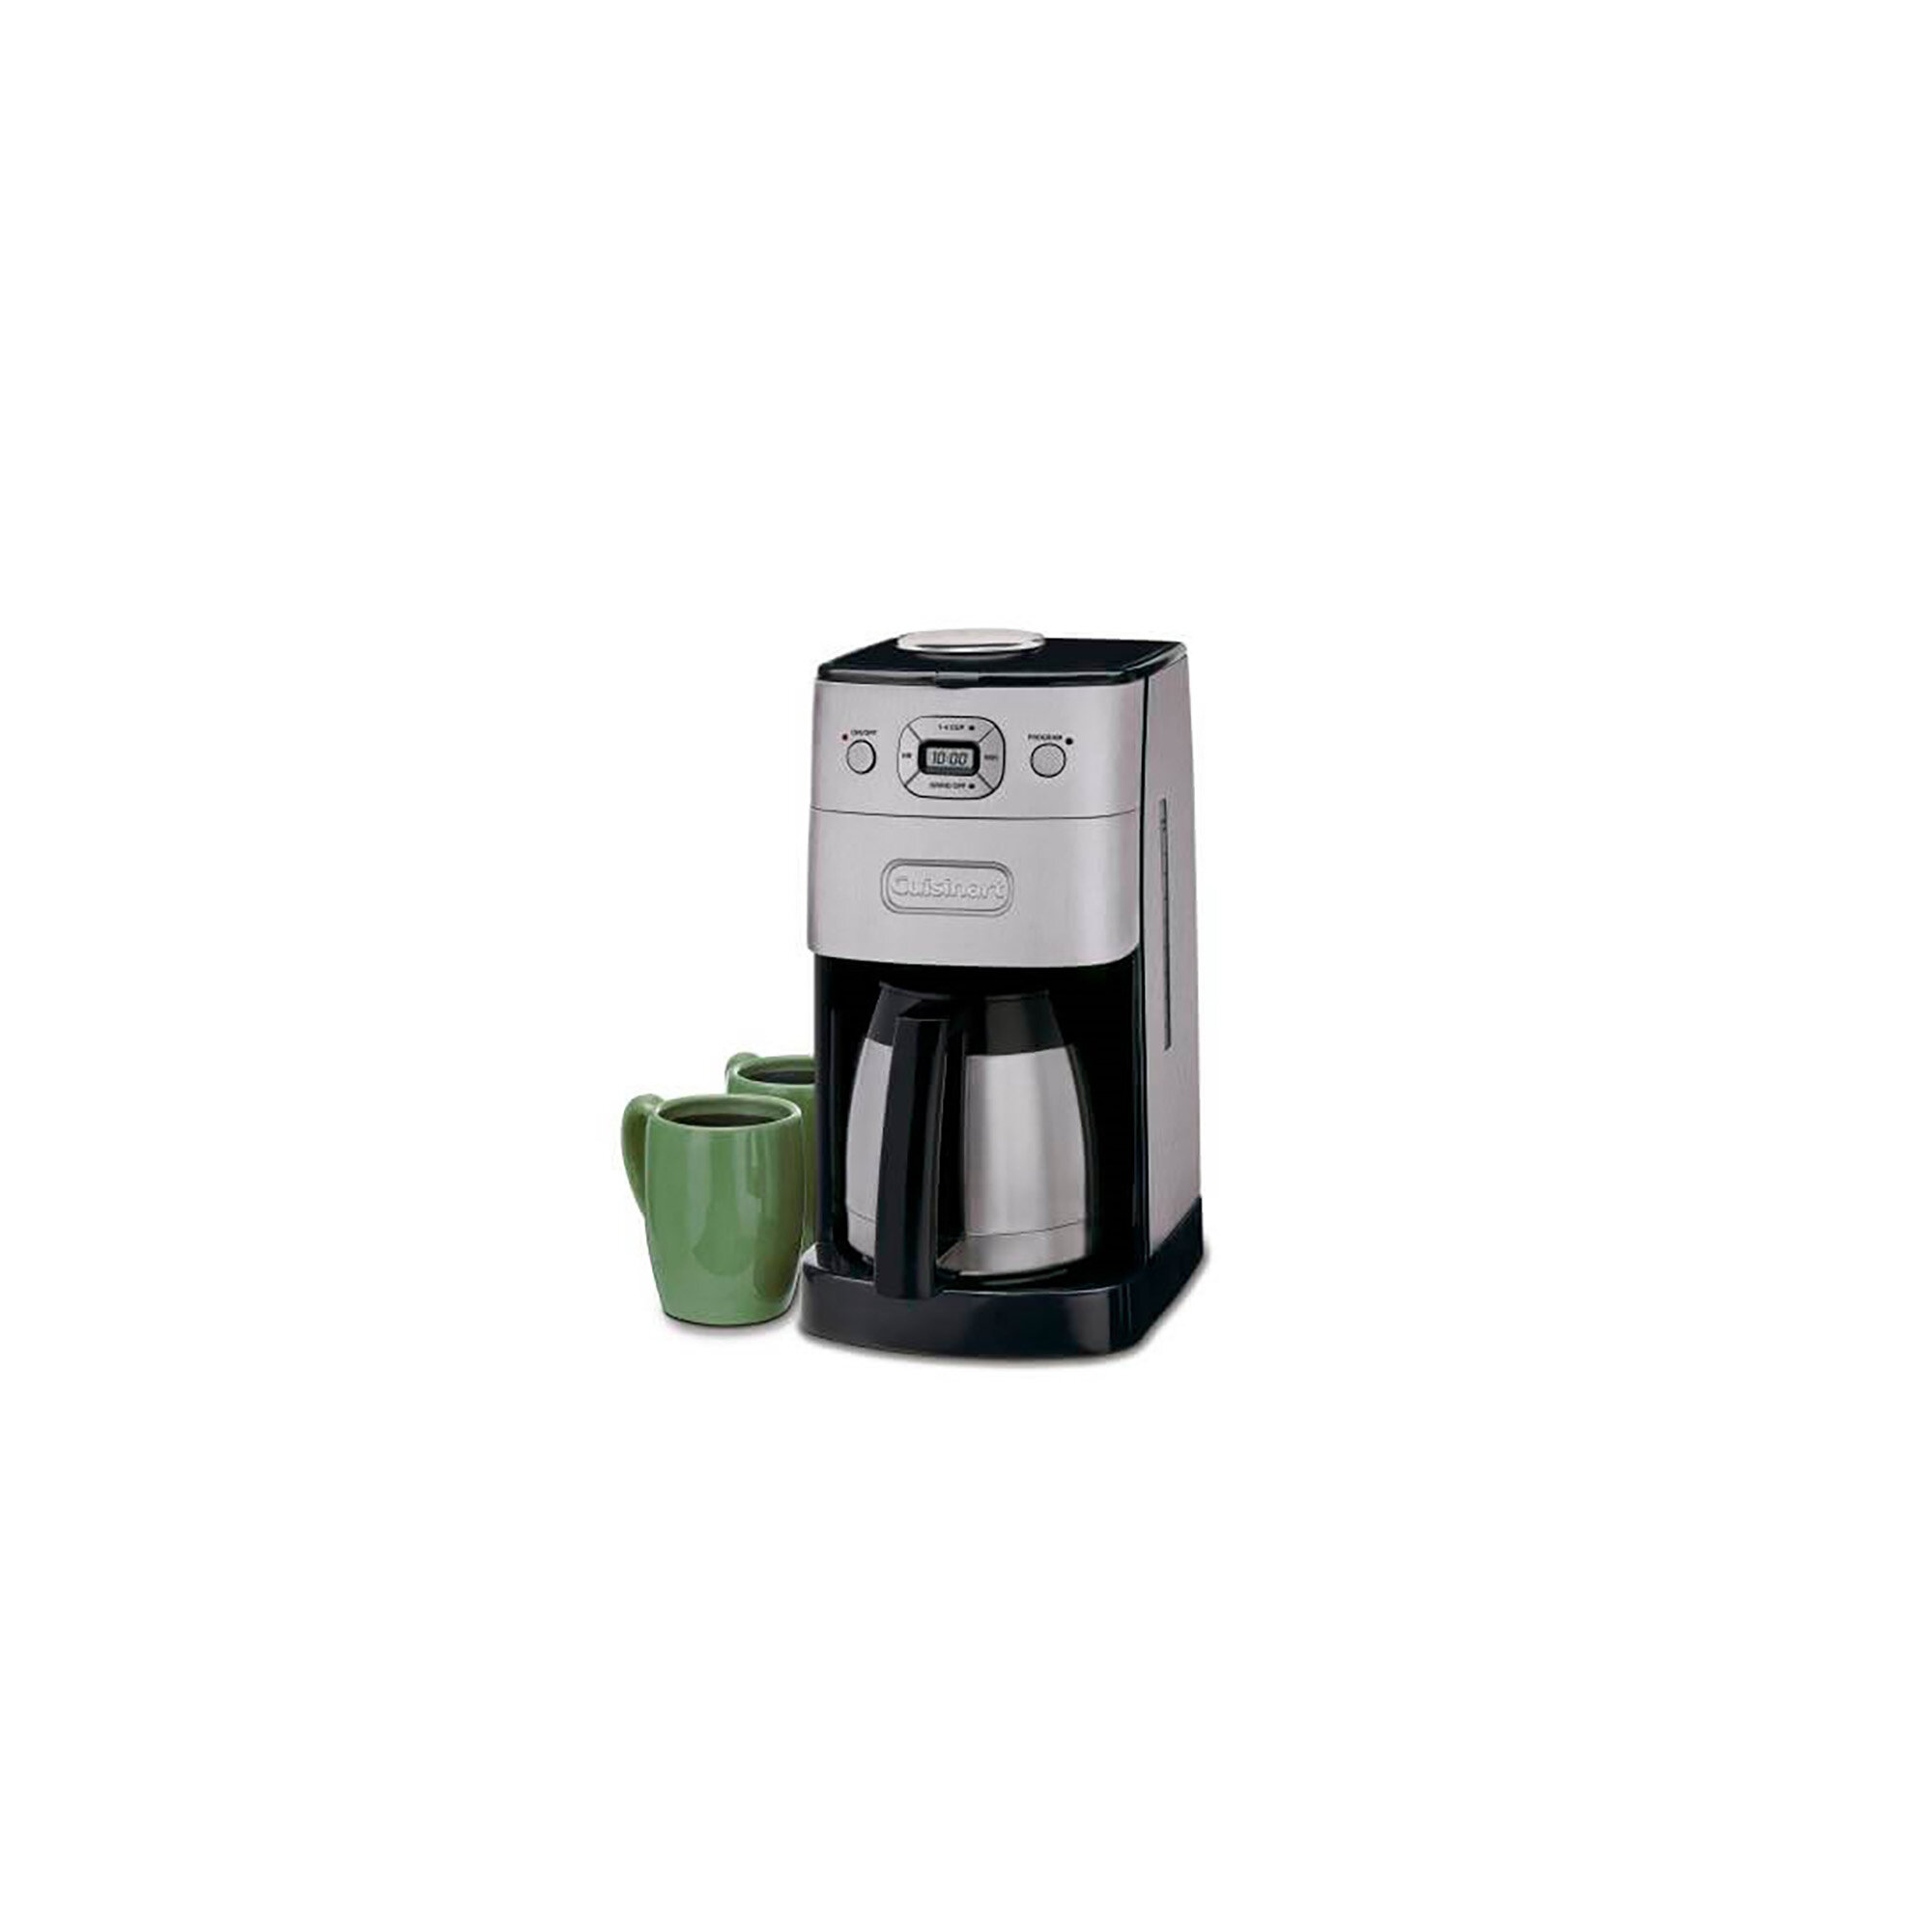 cuisinart grind and brew coffee maker